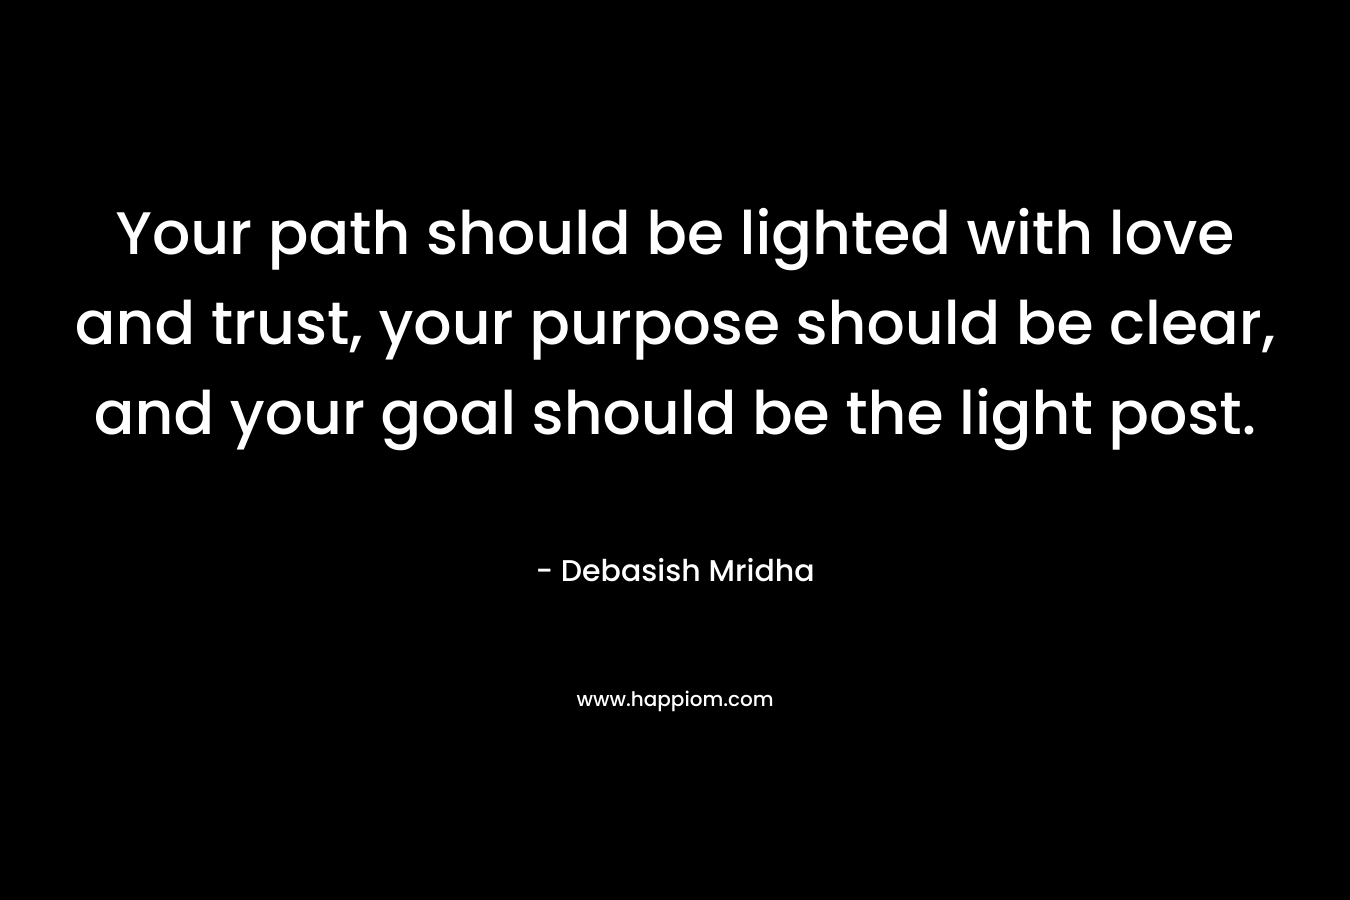 Your path should be lighted with love and trust, your purpose should be clear, and your goal should be the light post. – Debasish Mridha